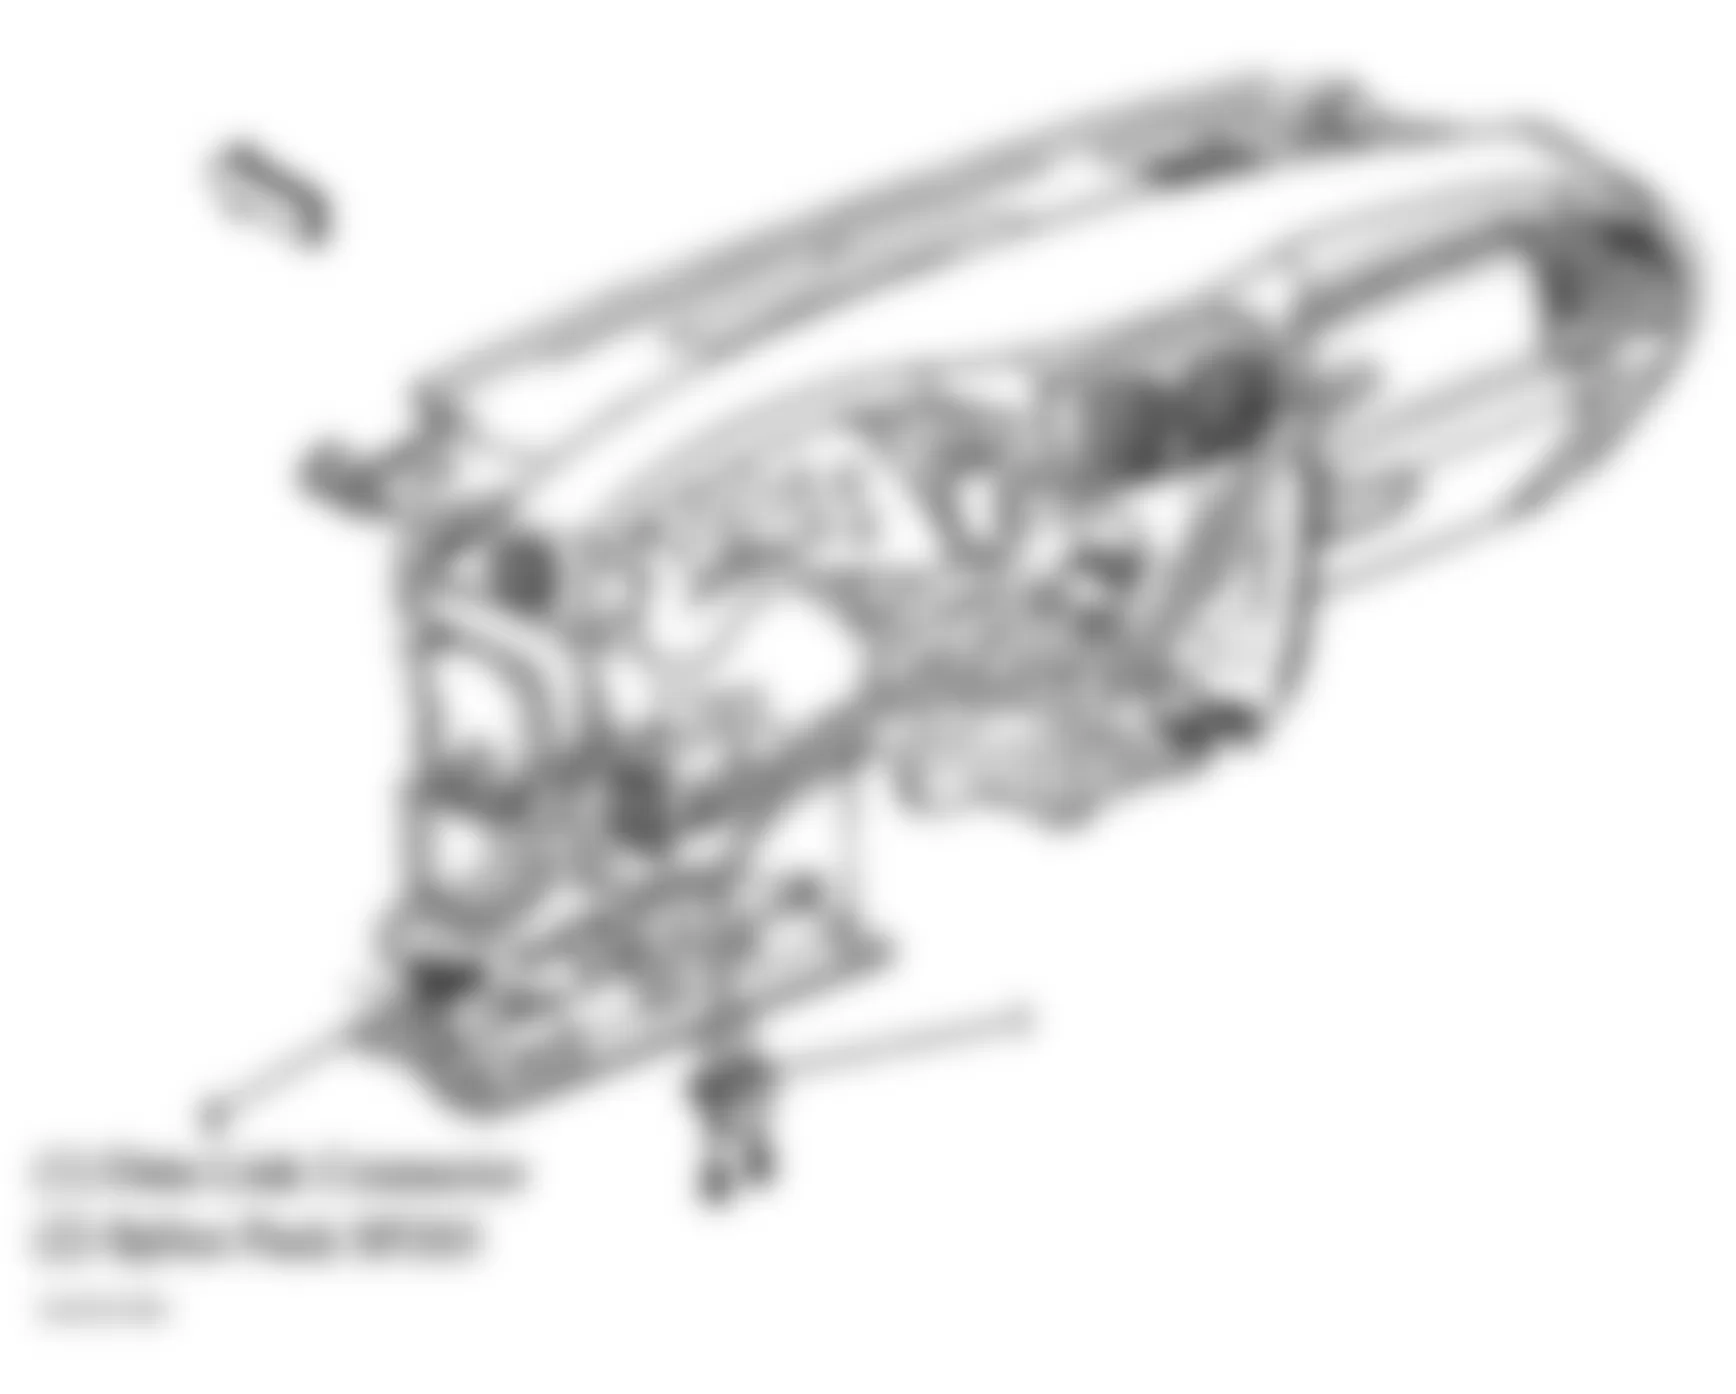 GMC Envoy XUV 2004 - Component Locations -  Dash Assembly